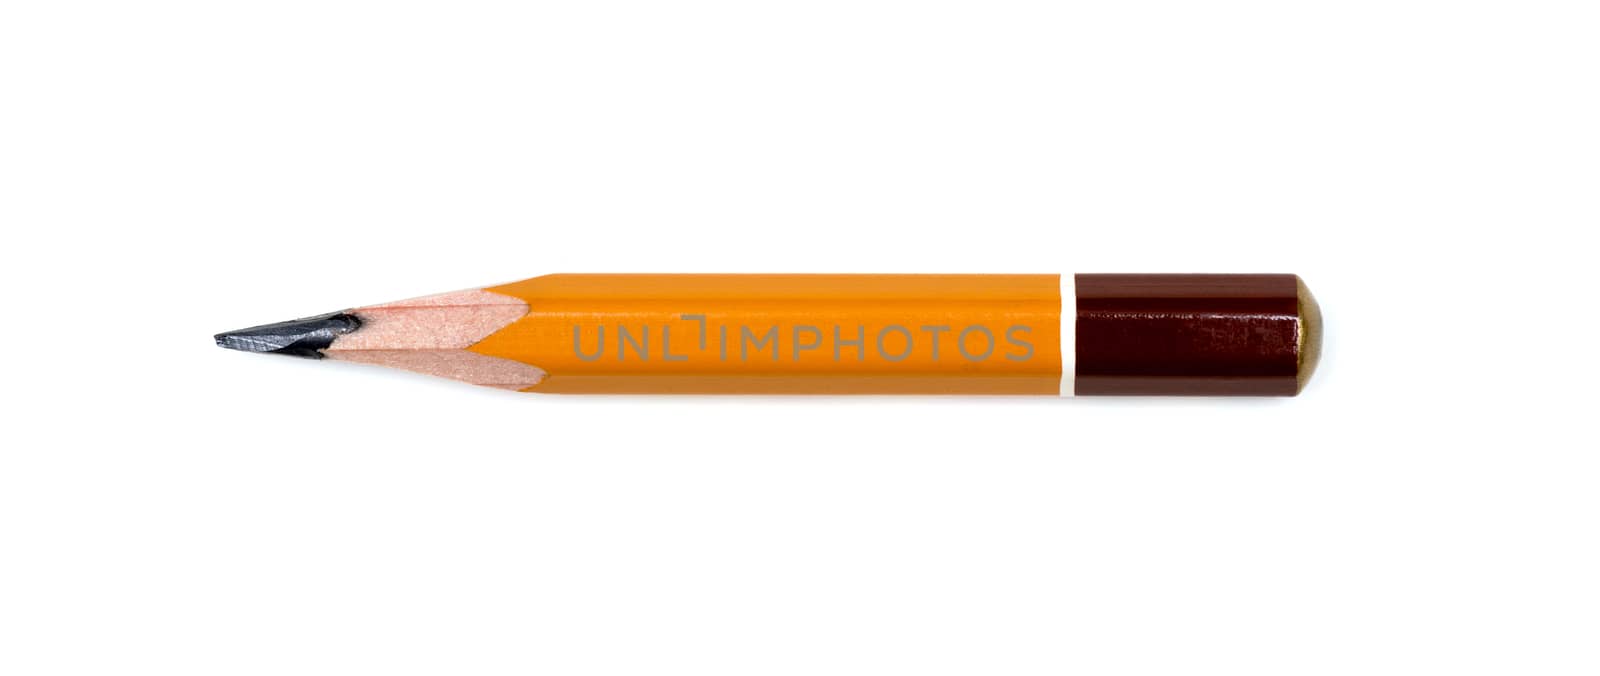 Pencil isolated on pure white background by DNKSTUDIO